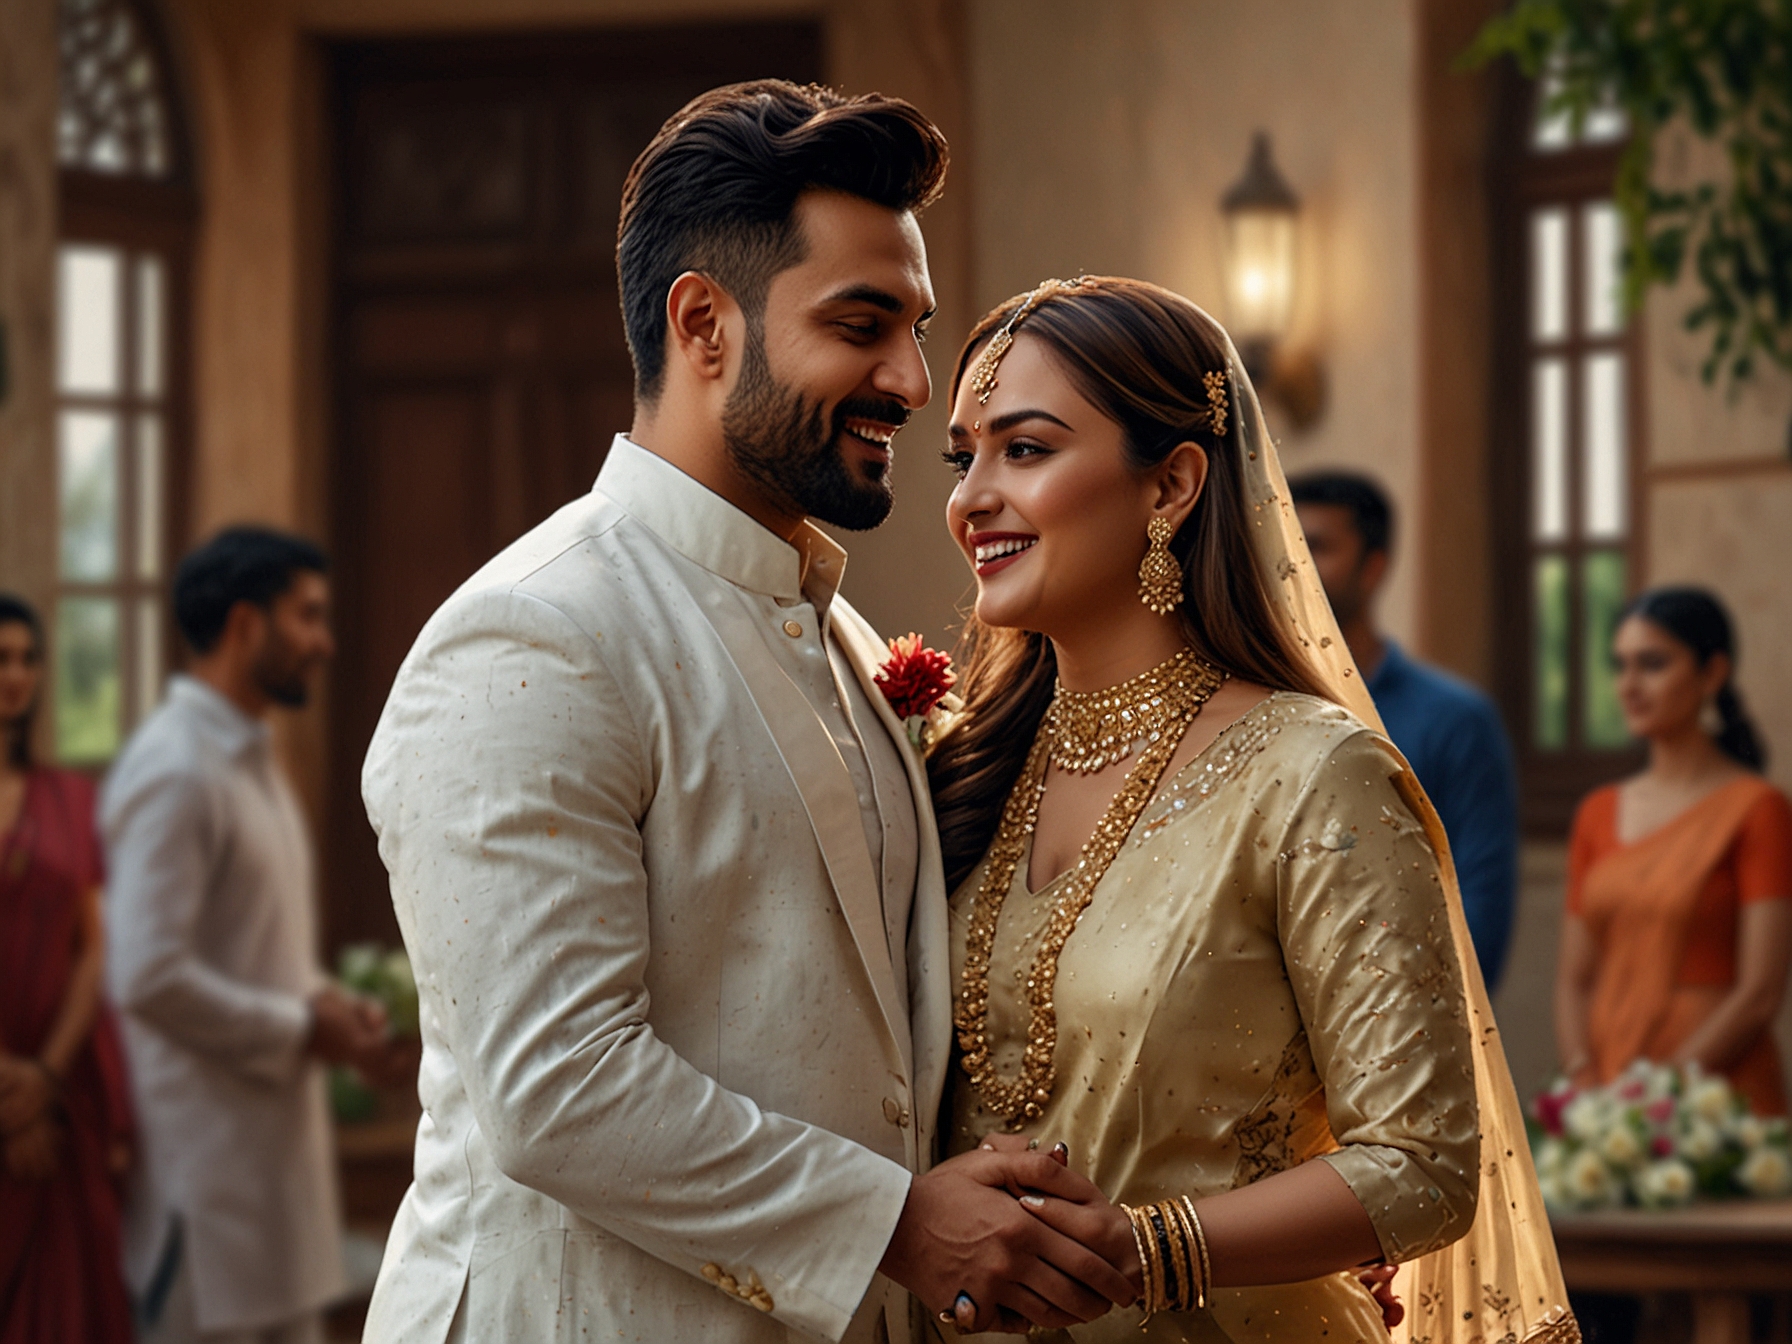 An intimate civil marriage ceremony for Sonakshi Sinha and Zaheer Iqbal, attended by close family and a few friends. The couple opts for simplicity and meaningful moments in their union.